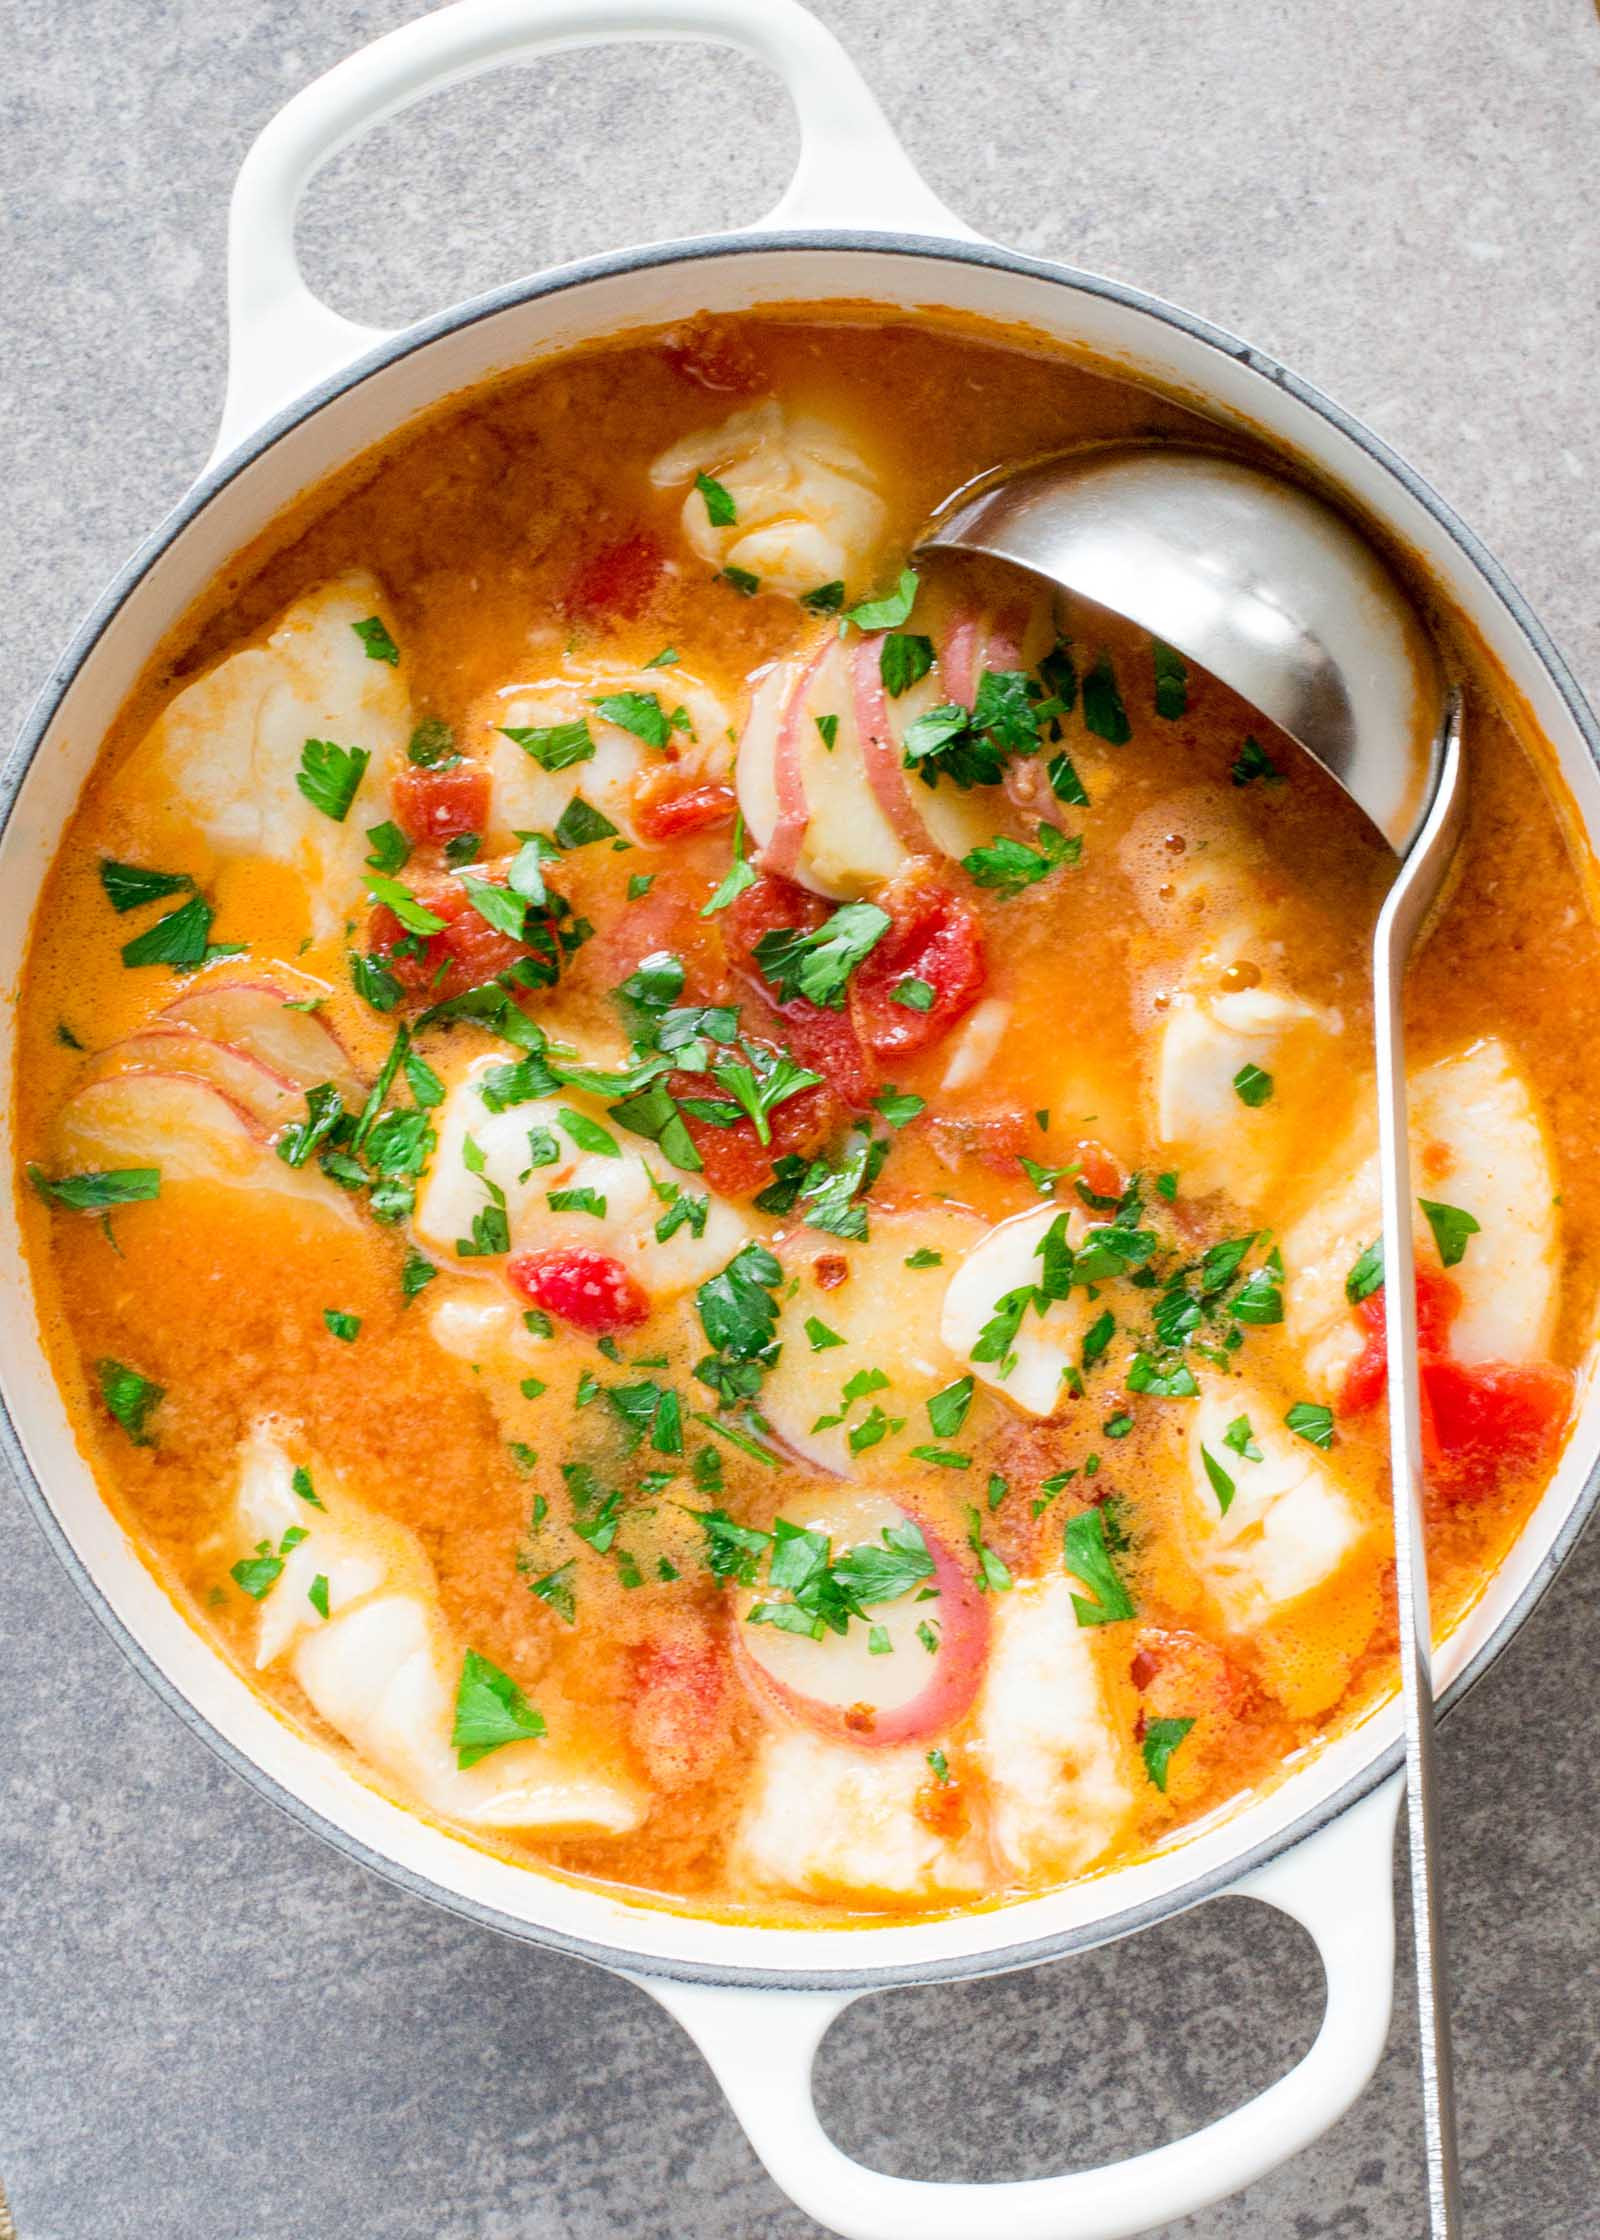 Recipes For Fish Stew
 Fish Stew with Ginger and Tomatoes Recipe